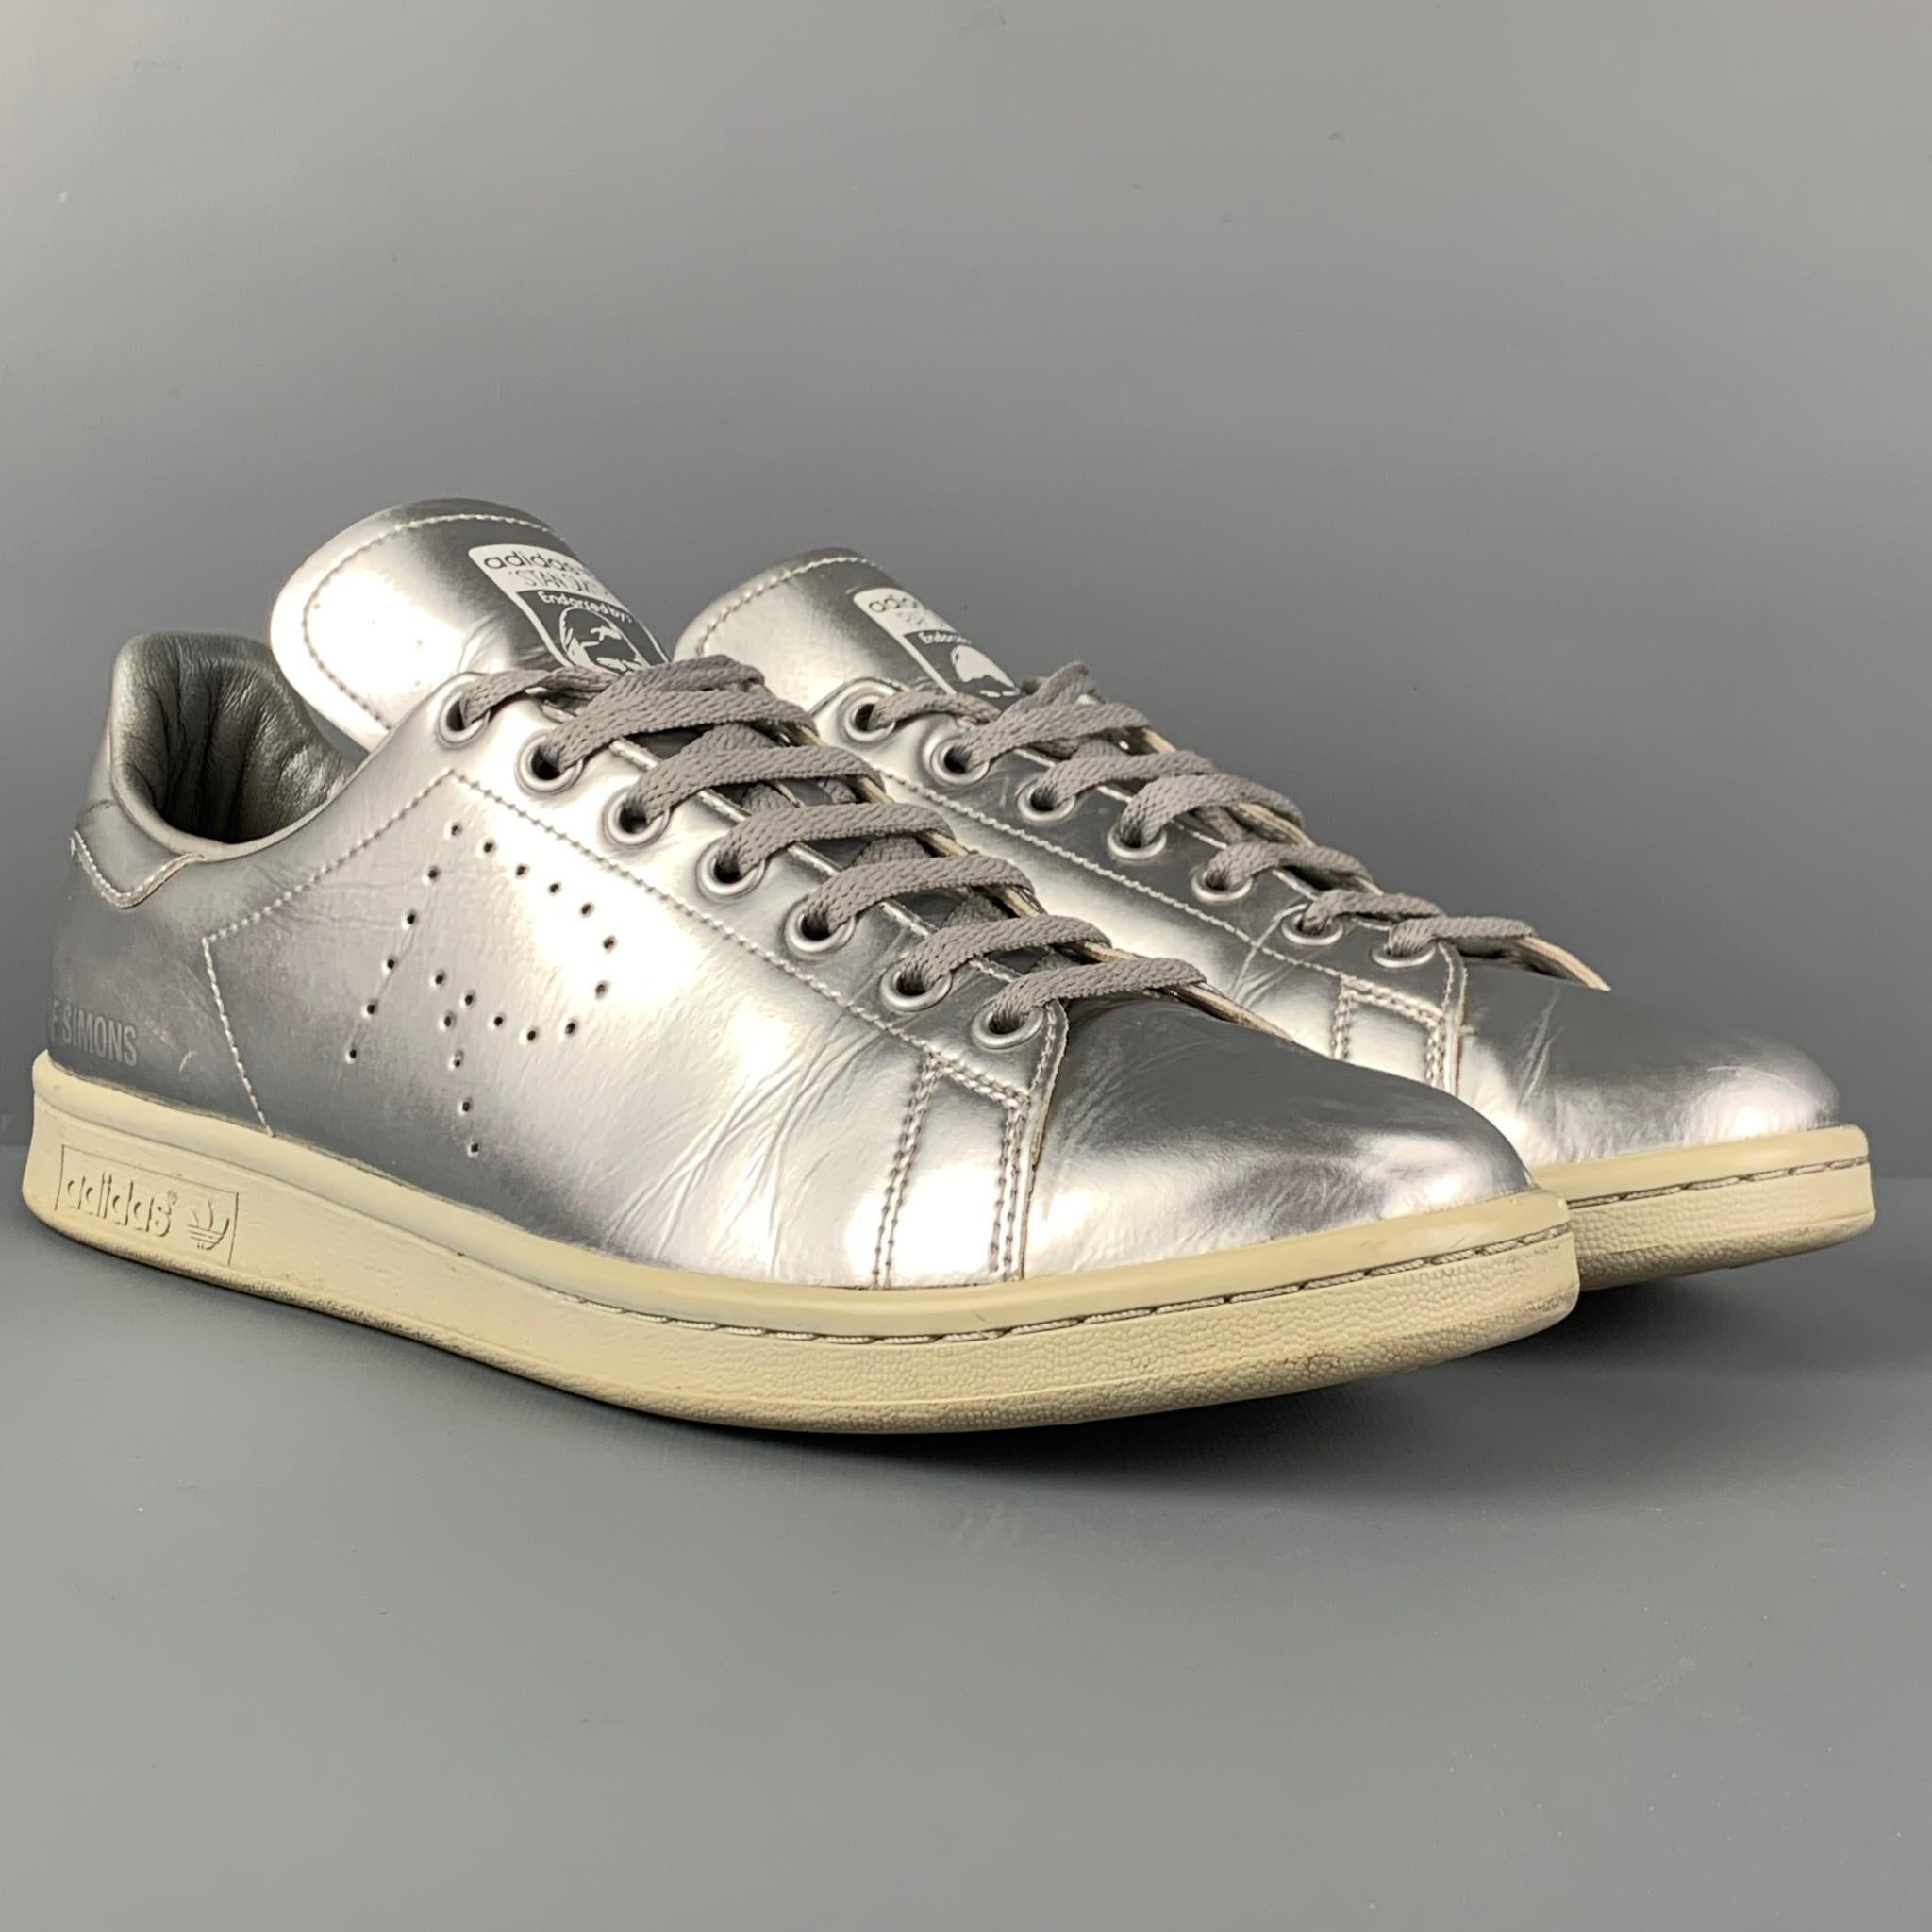 RAF SIMONS x ADIDAS sneakers comes in a grey metallic leather featuring a low-top style anda lace up closure. 

Very Good Pre-Owned Condition. Light wear.
Marked: 10

Outsole: 12 in. x 4 in. 